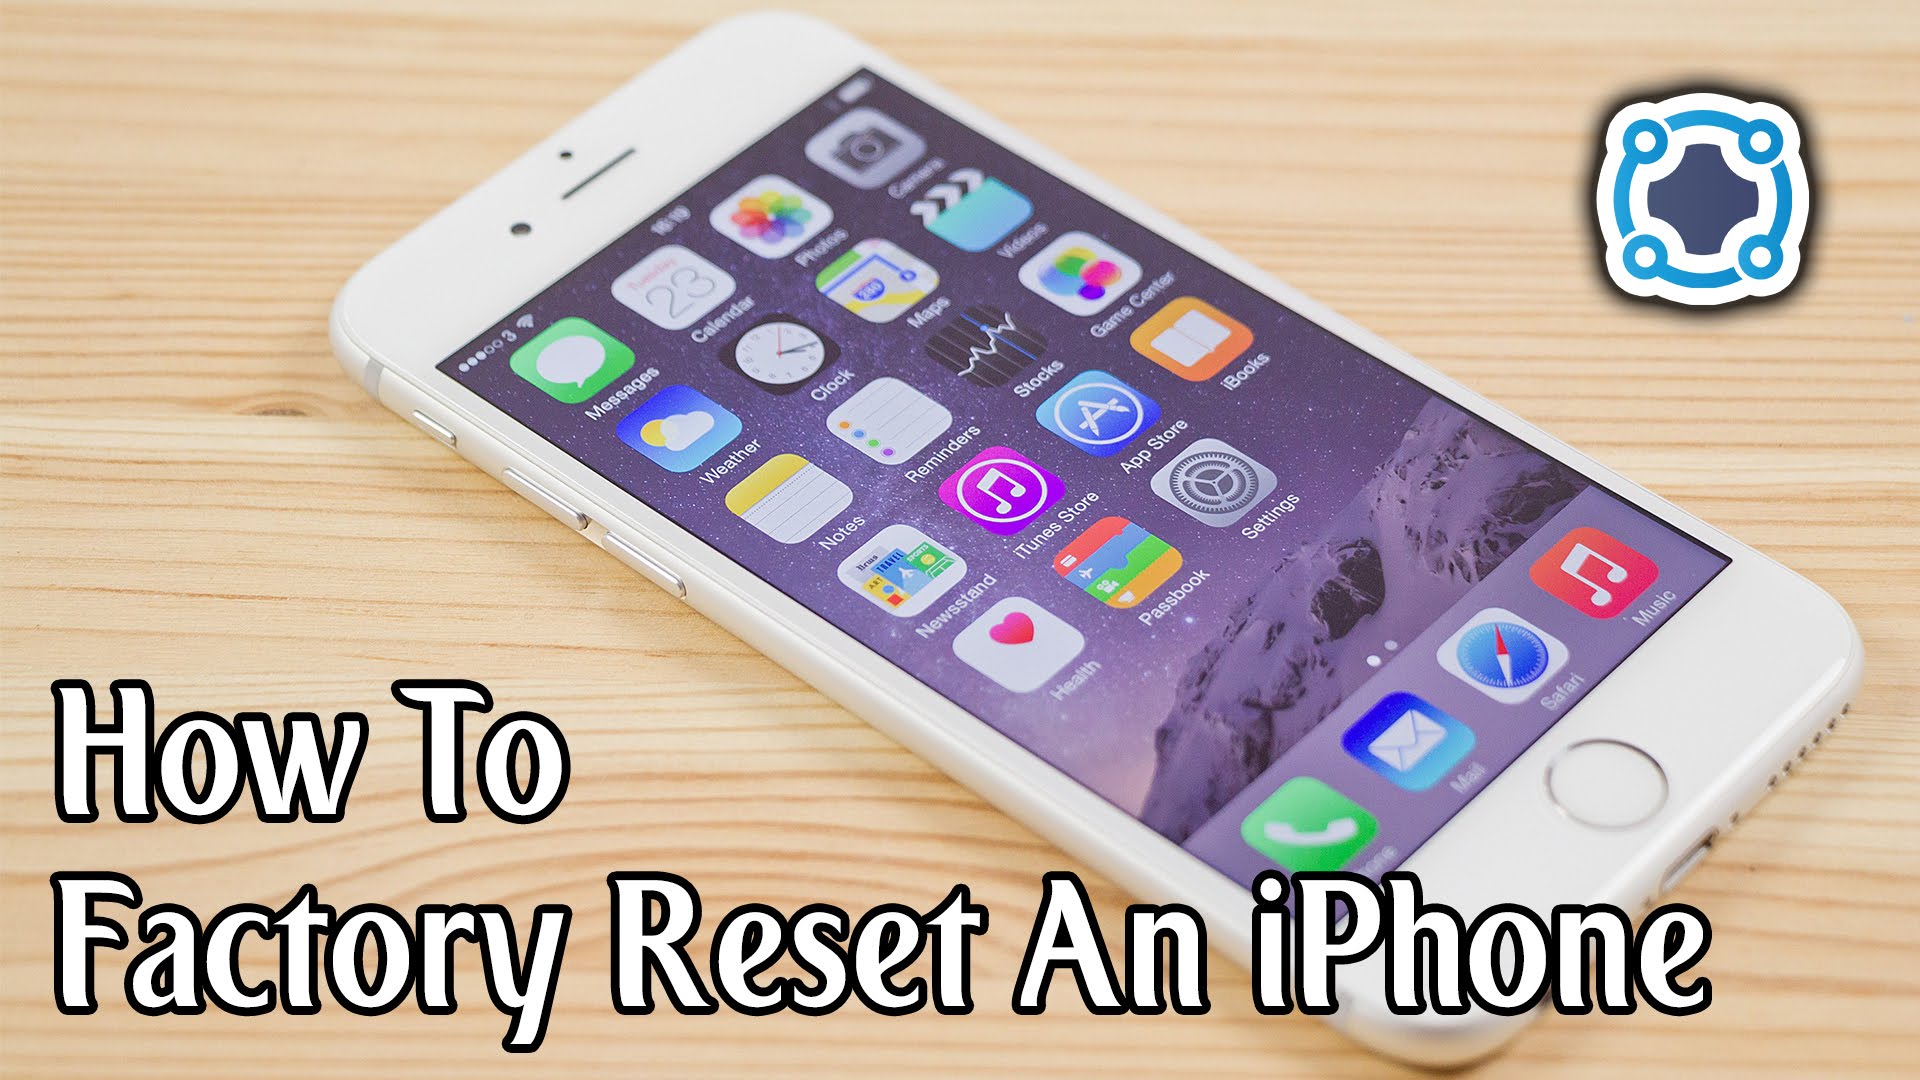 How To Factory Reset An iPhone